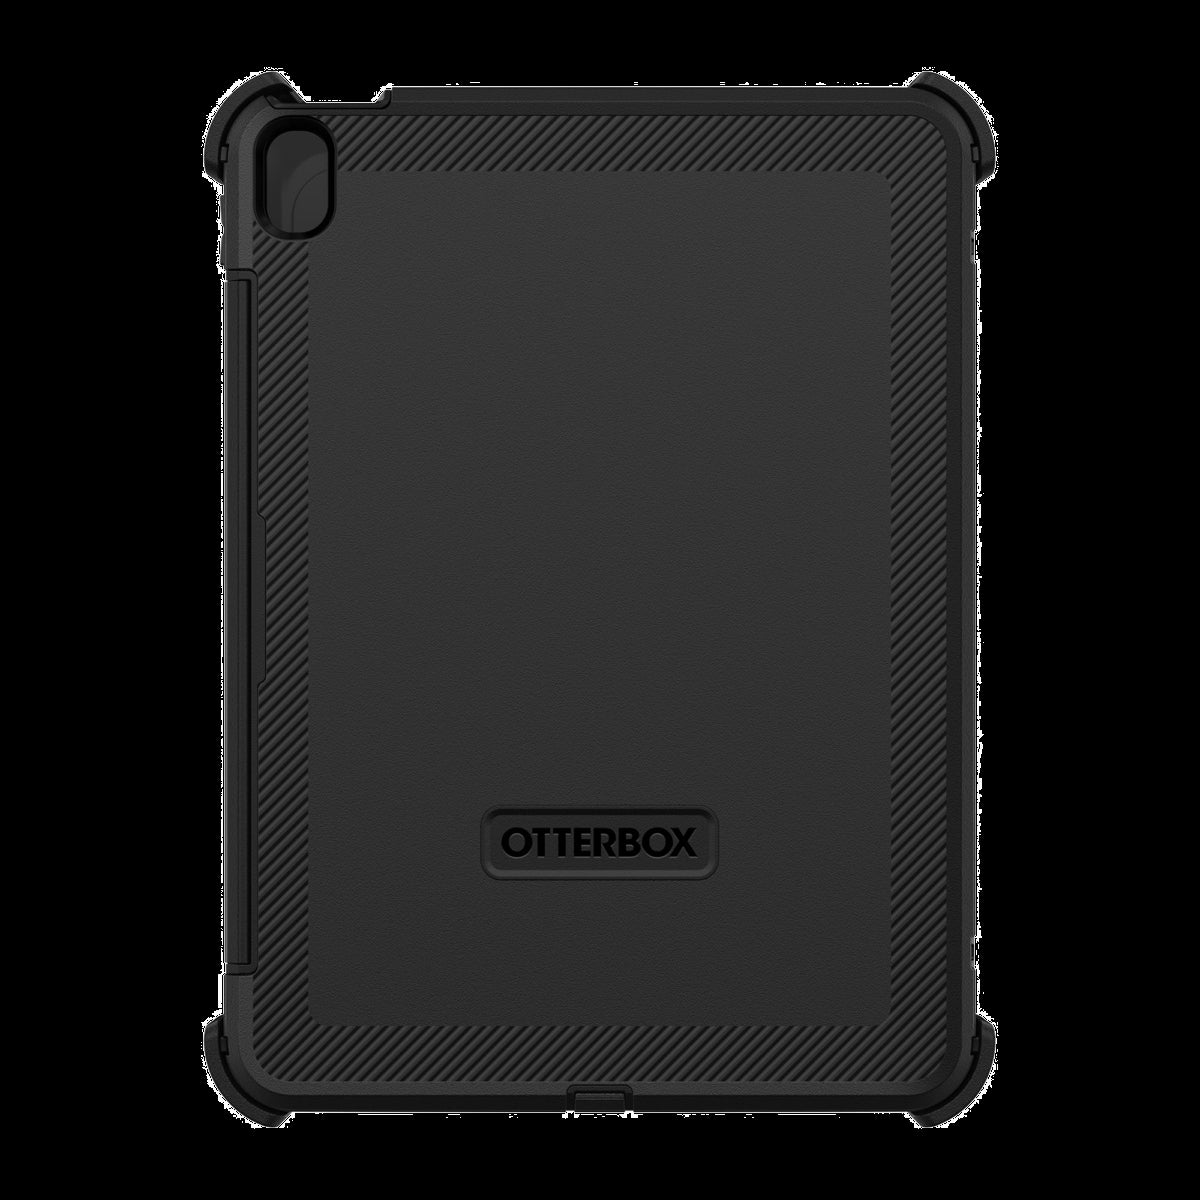 <p>Take on every adventure with confidence with the OtterBox Defender Series, the multi-layer case that deflects and absorbs impact, keeping it away from your device.</p>